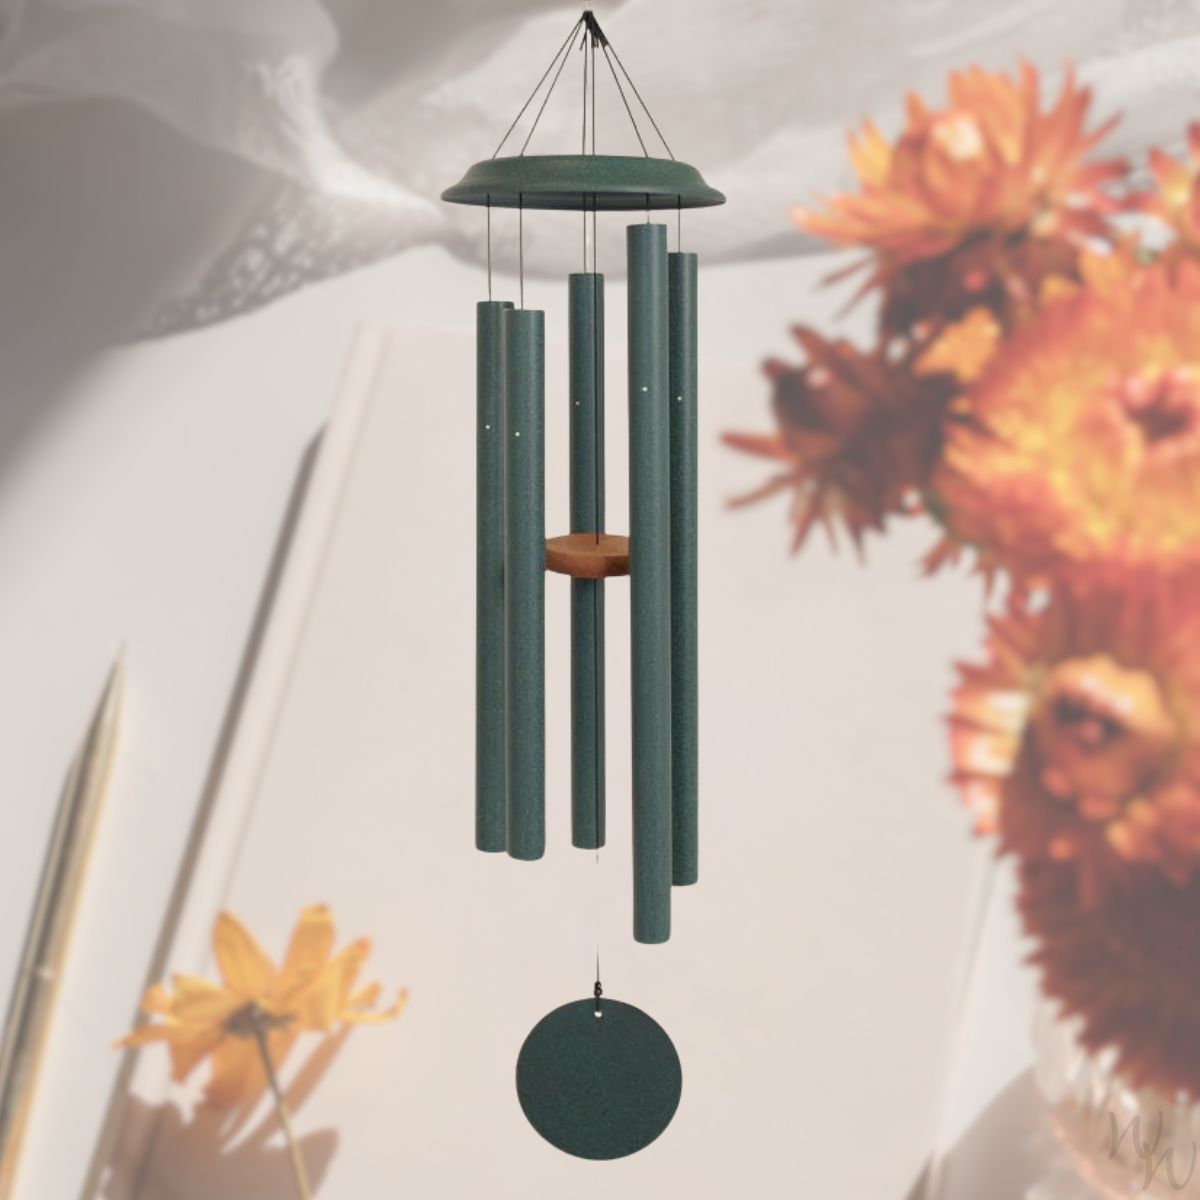 Shenandoah Melodies 47 Inch Sage Wind Chime - Scale Of B